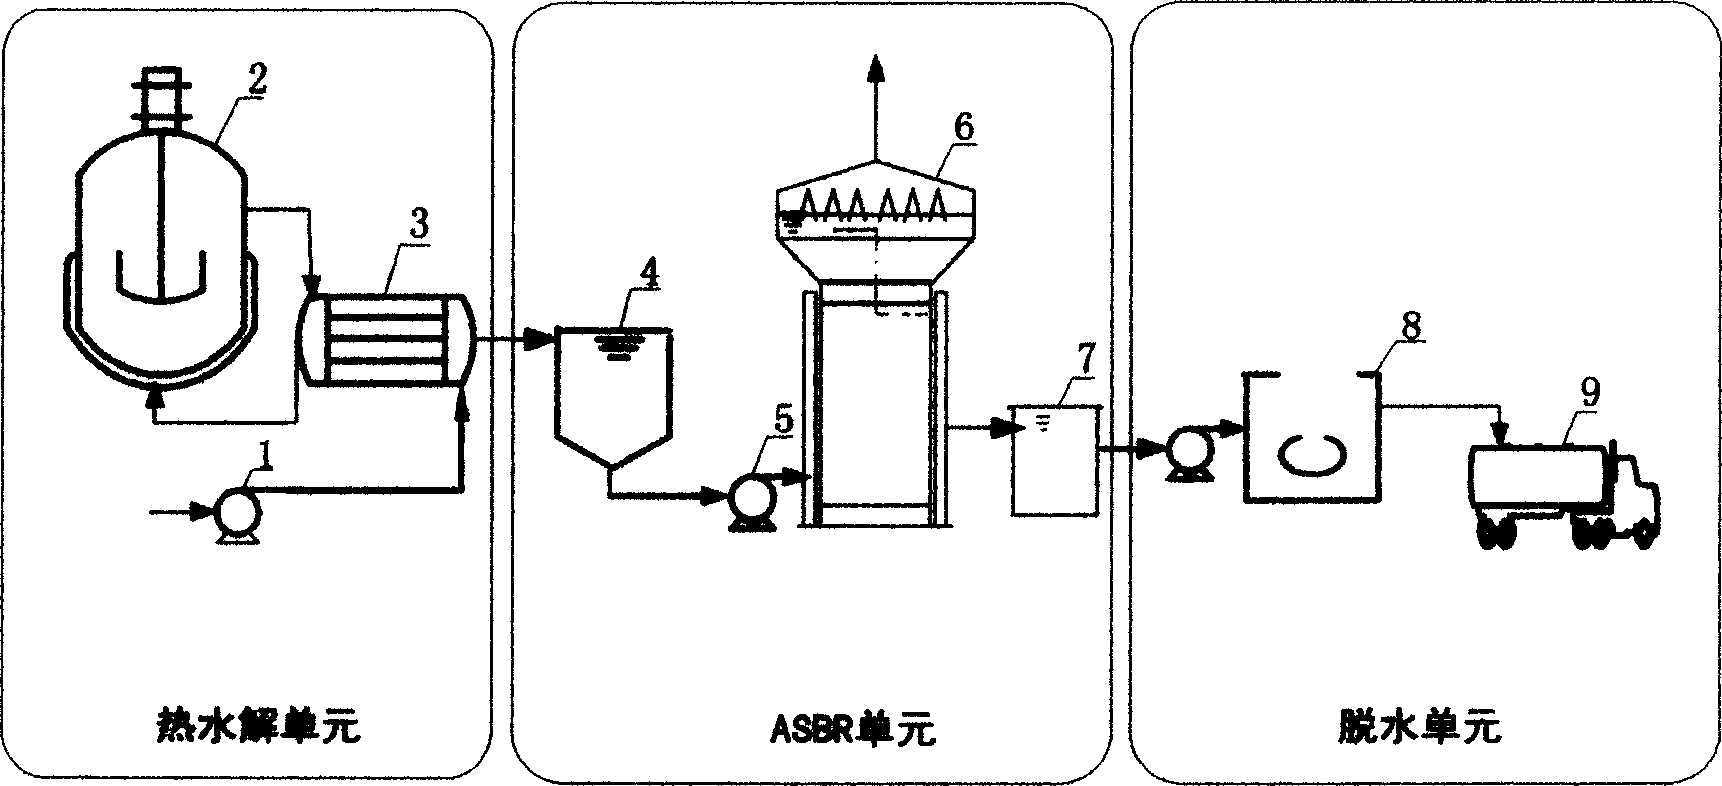 Process for treating excess sludge